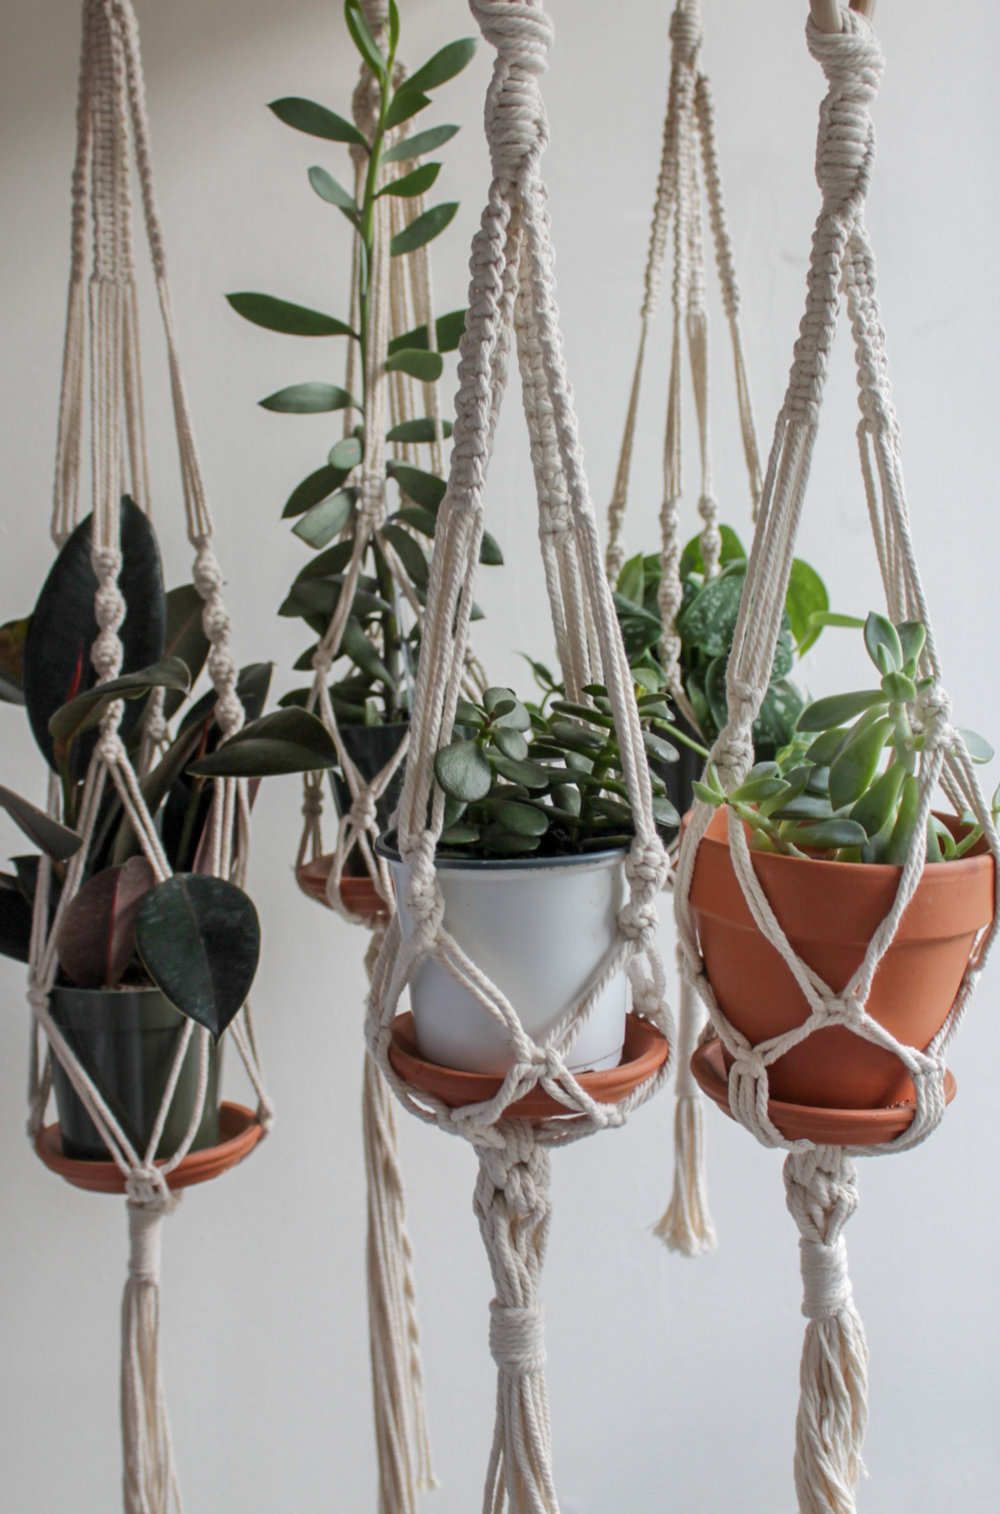 Tip #1 Clever Ideas To Display Plants: Group Plants In Macrame Hangers